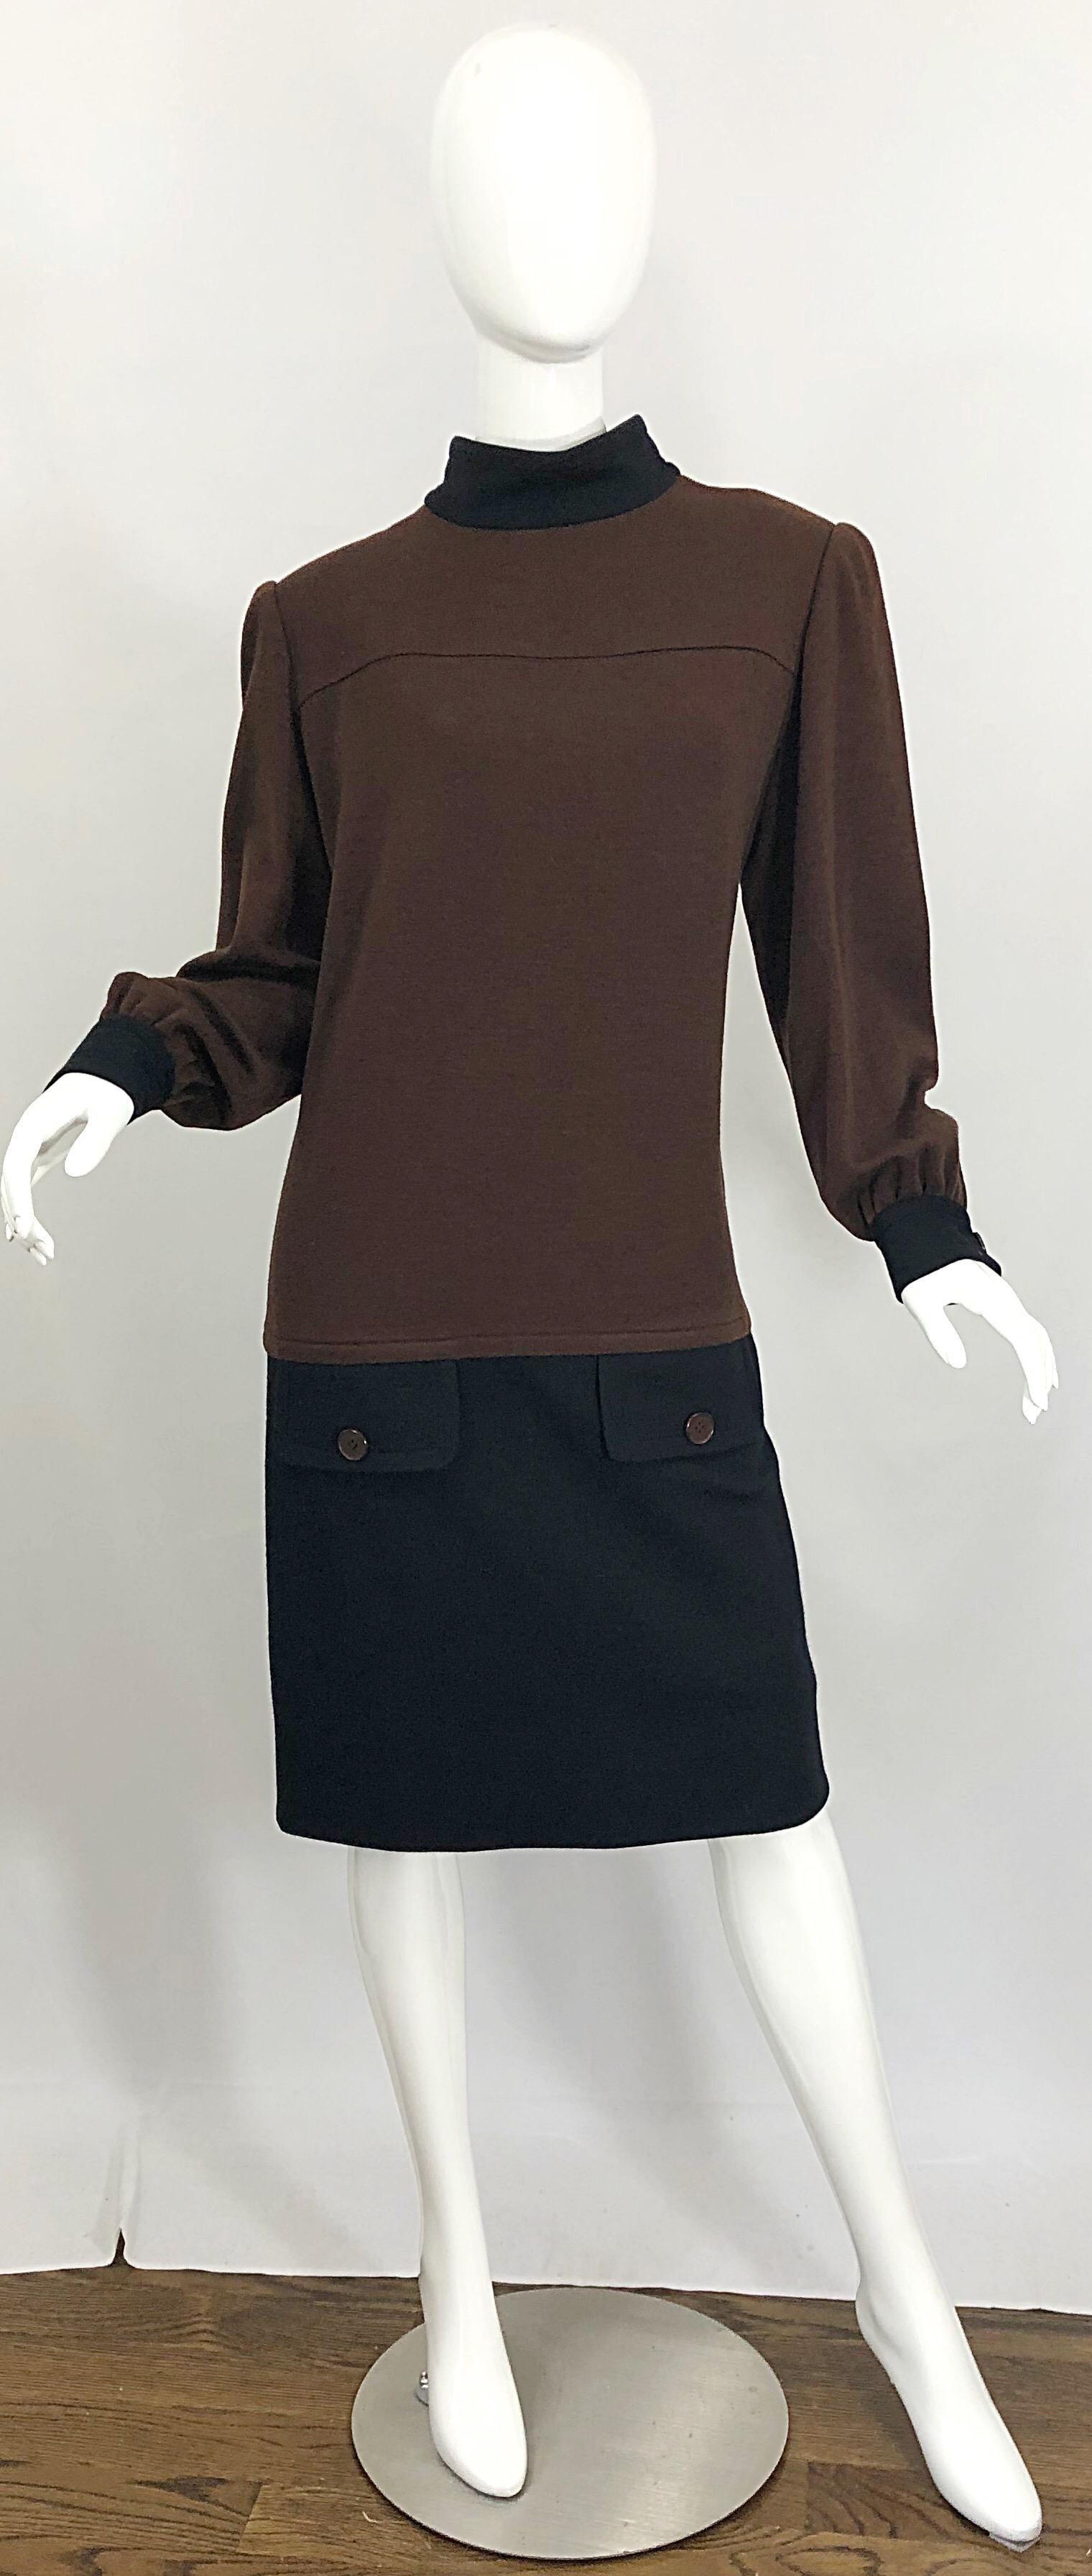 Chic vintage 1980s GIVENCHY brown and black virgin wool color block sac dress! Features a chocolate brown bodice with a black skirt, black collar, and black sleeve cuffs. Hidden zipper up the back with hook-and-eye closure. Can easily be worn day or